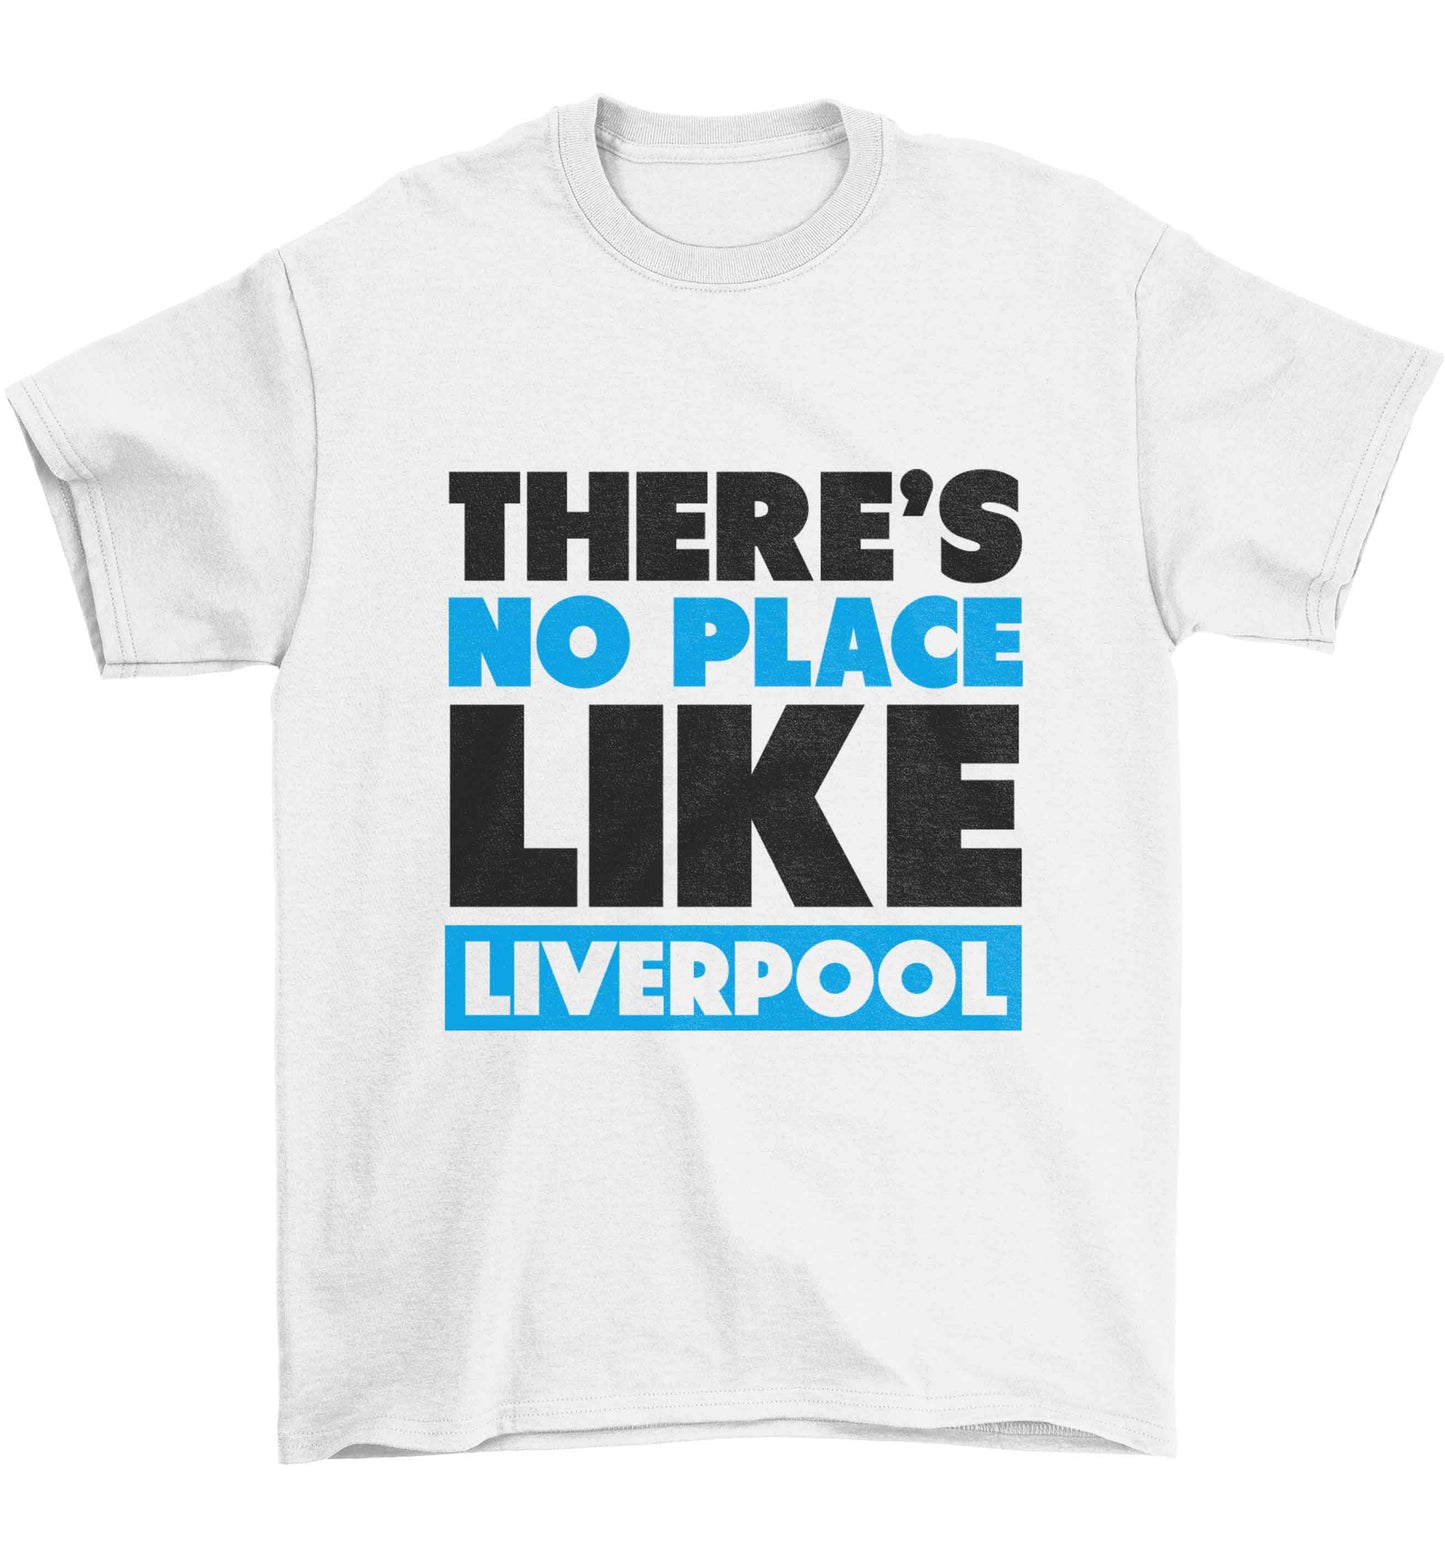 There's no place like Liverpool Children's white Tshirt 12-13 Years